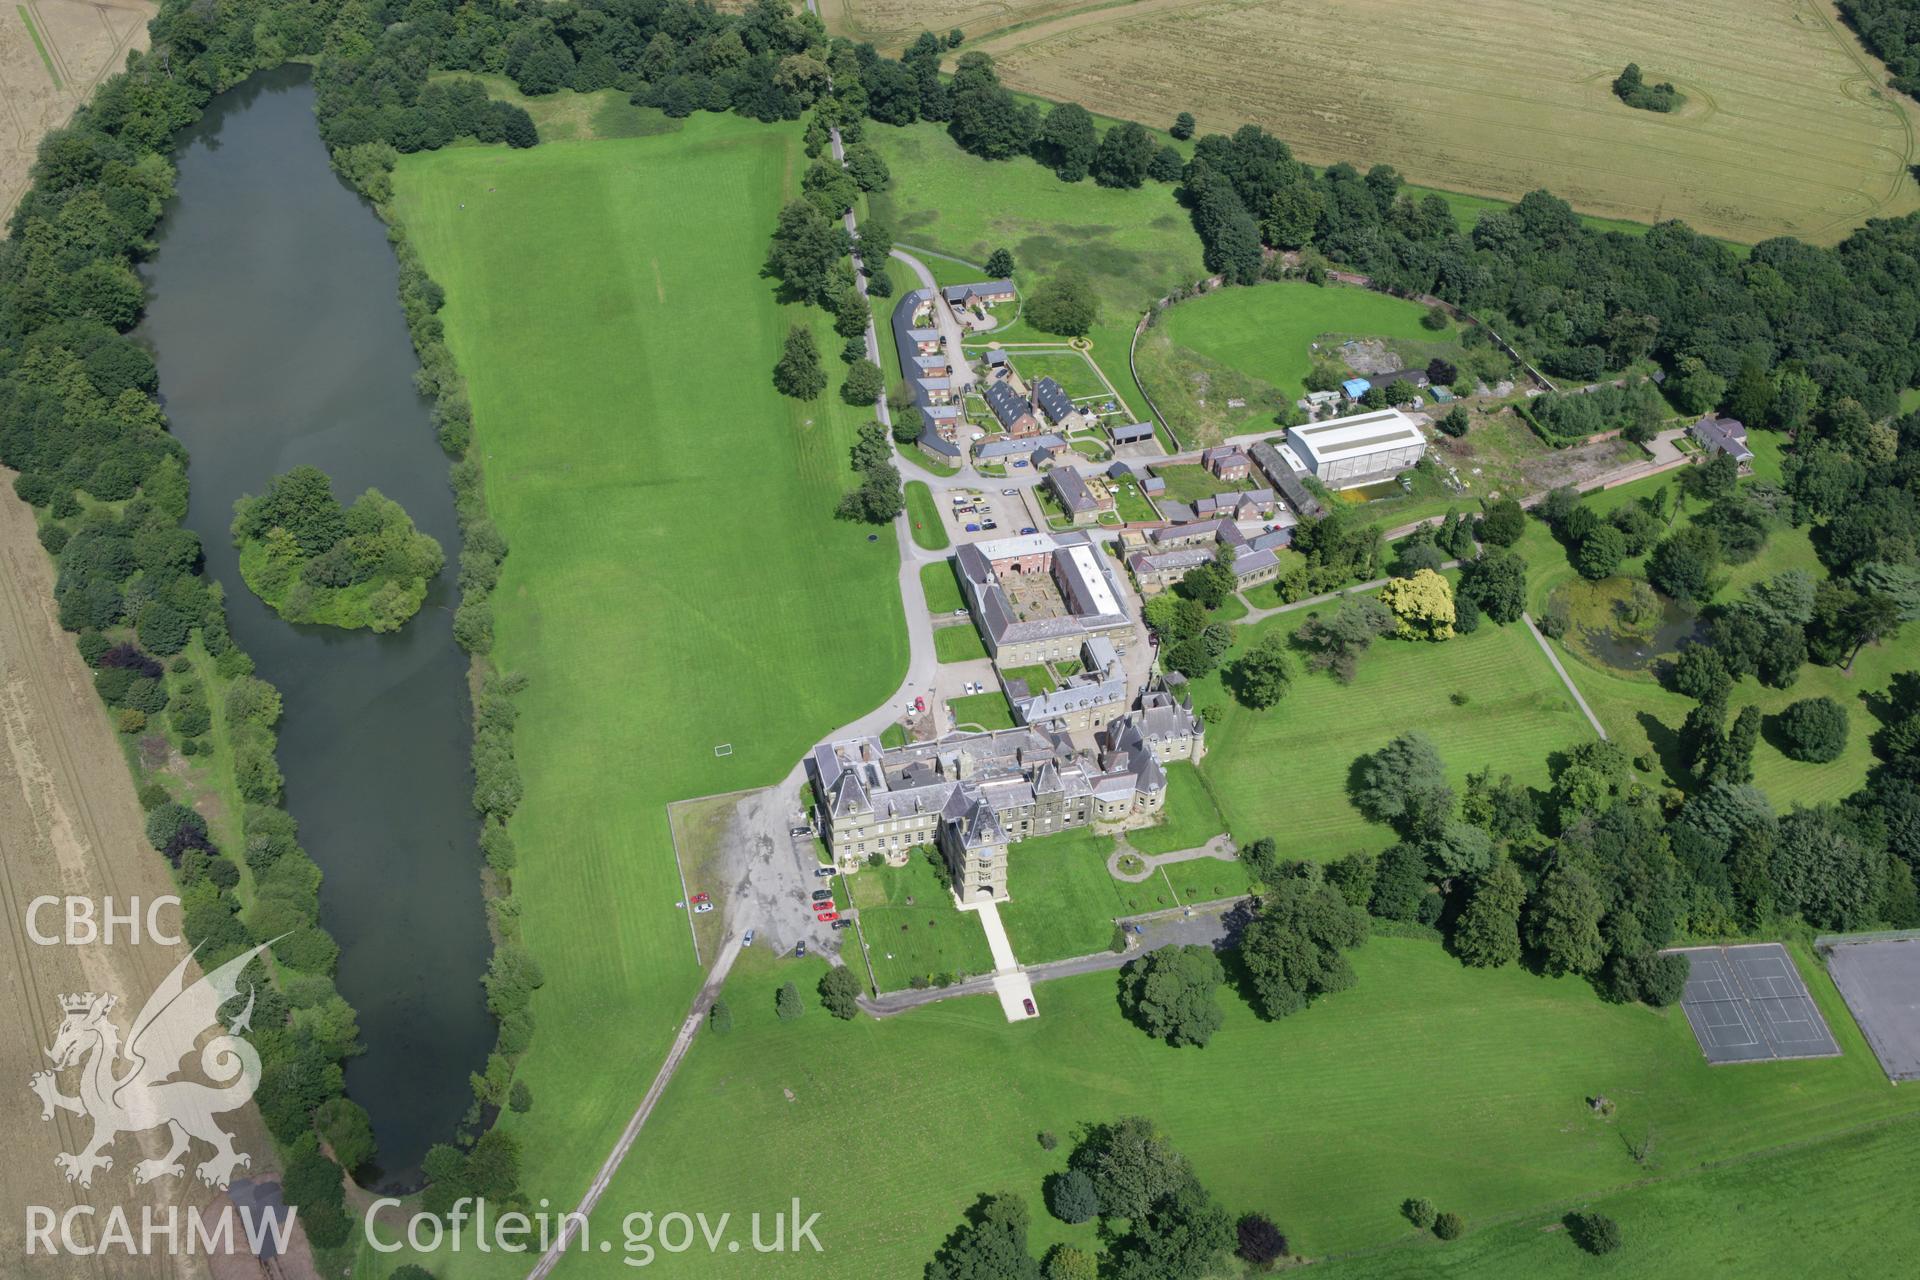 RCAHMW colour oblique aerial photograph of Wynnstay Park Mansion, Ruabon. Taken on 24 July 2007 by Toby Driver